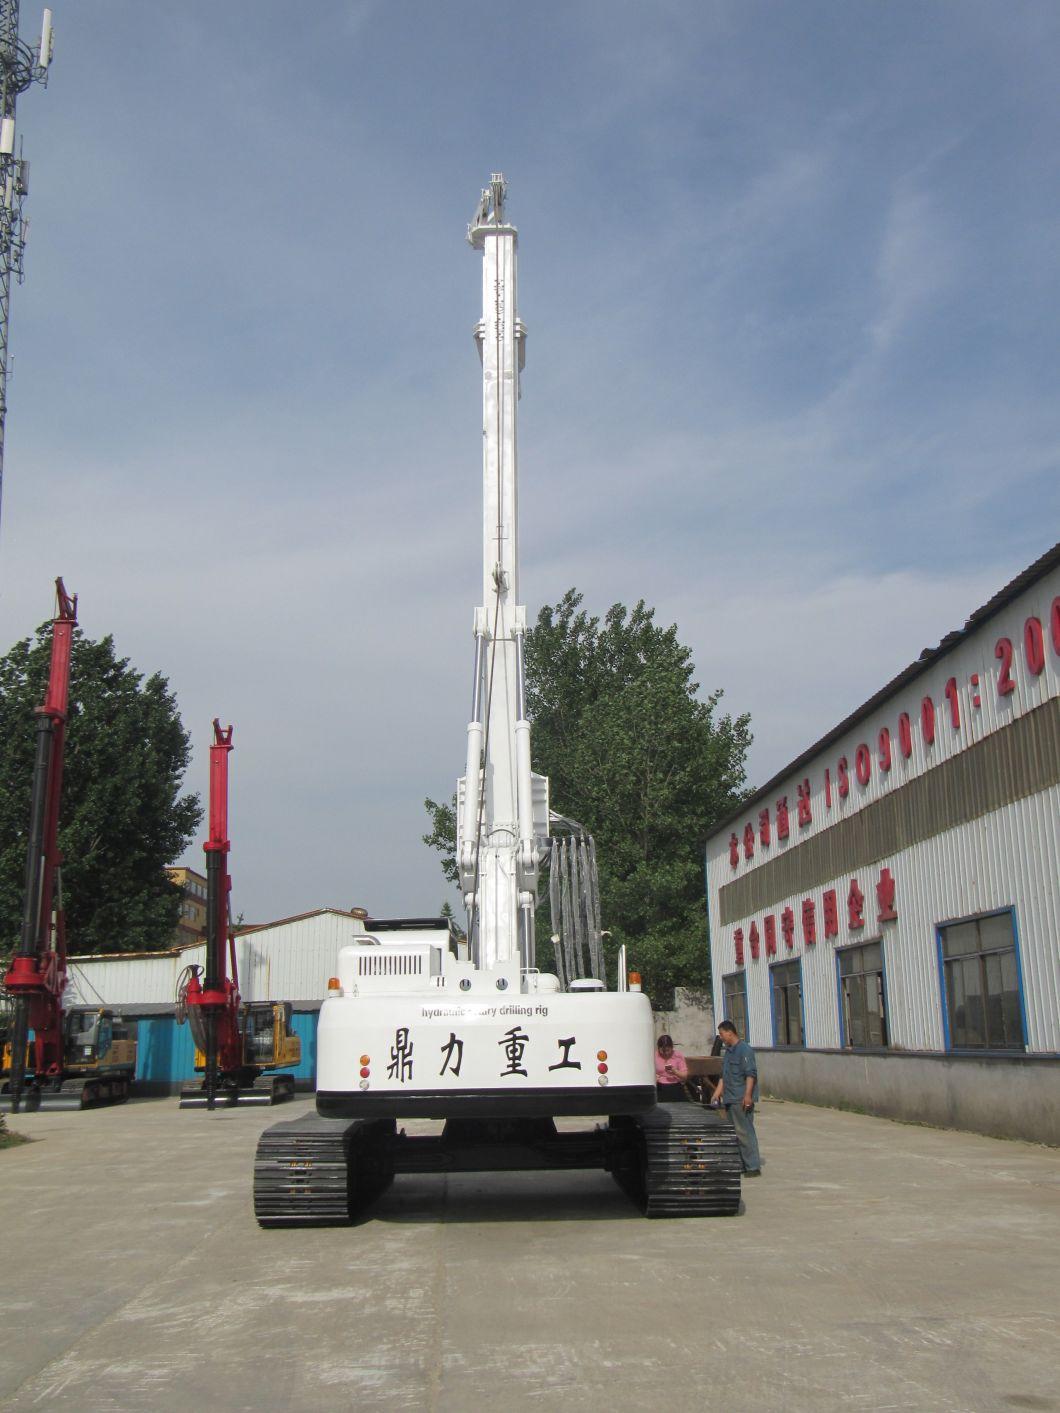 Small Crawler Crane Industrial Crane Motor Dr-100 Mining Water Well Drilling Rig